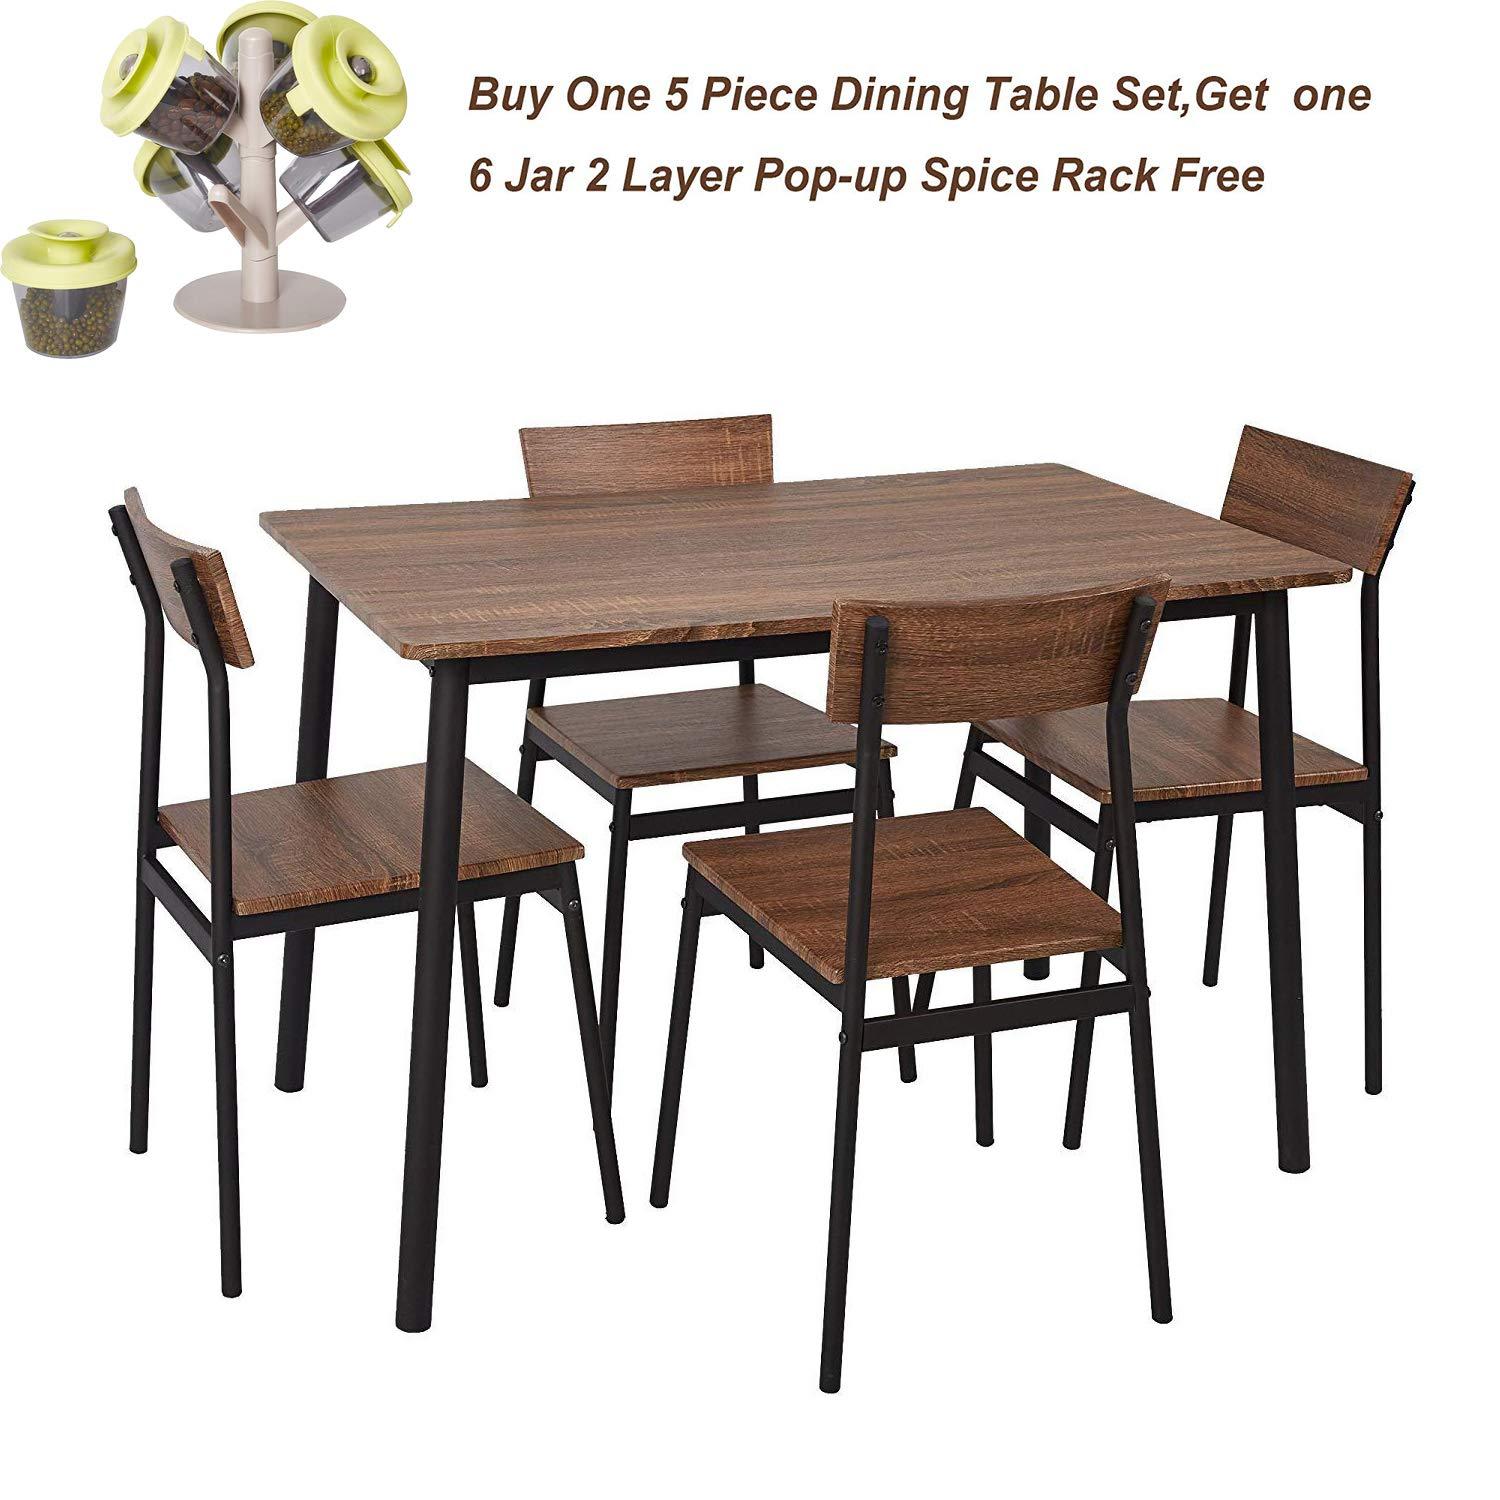 Bosonshop 5 Piece Wood Dining Table Set with Metal Legs, Retro Brown